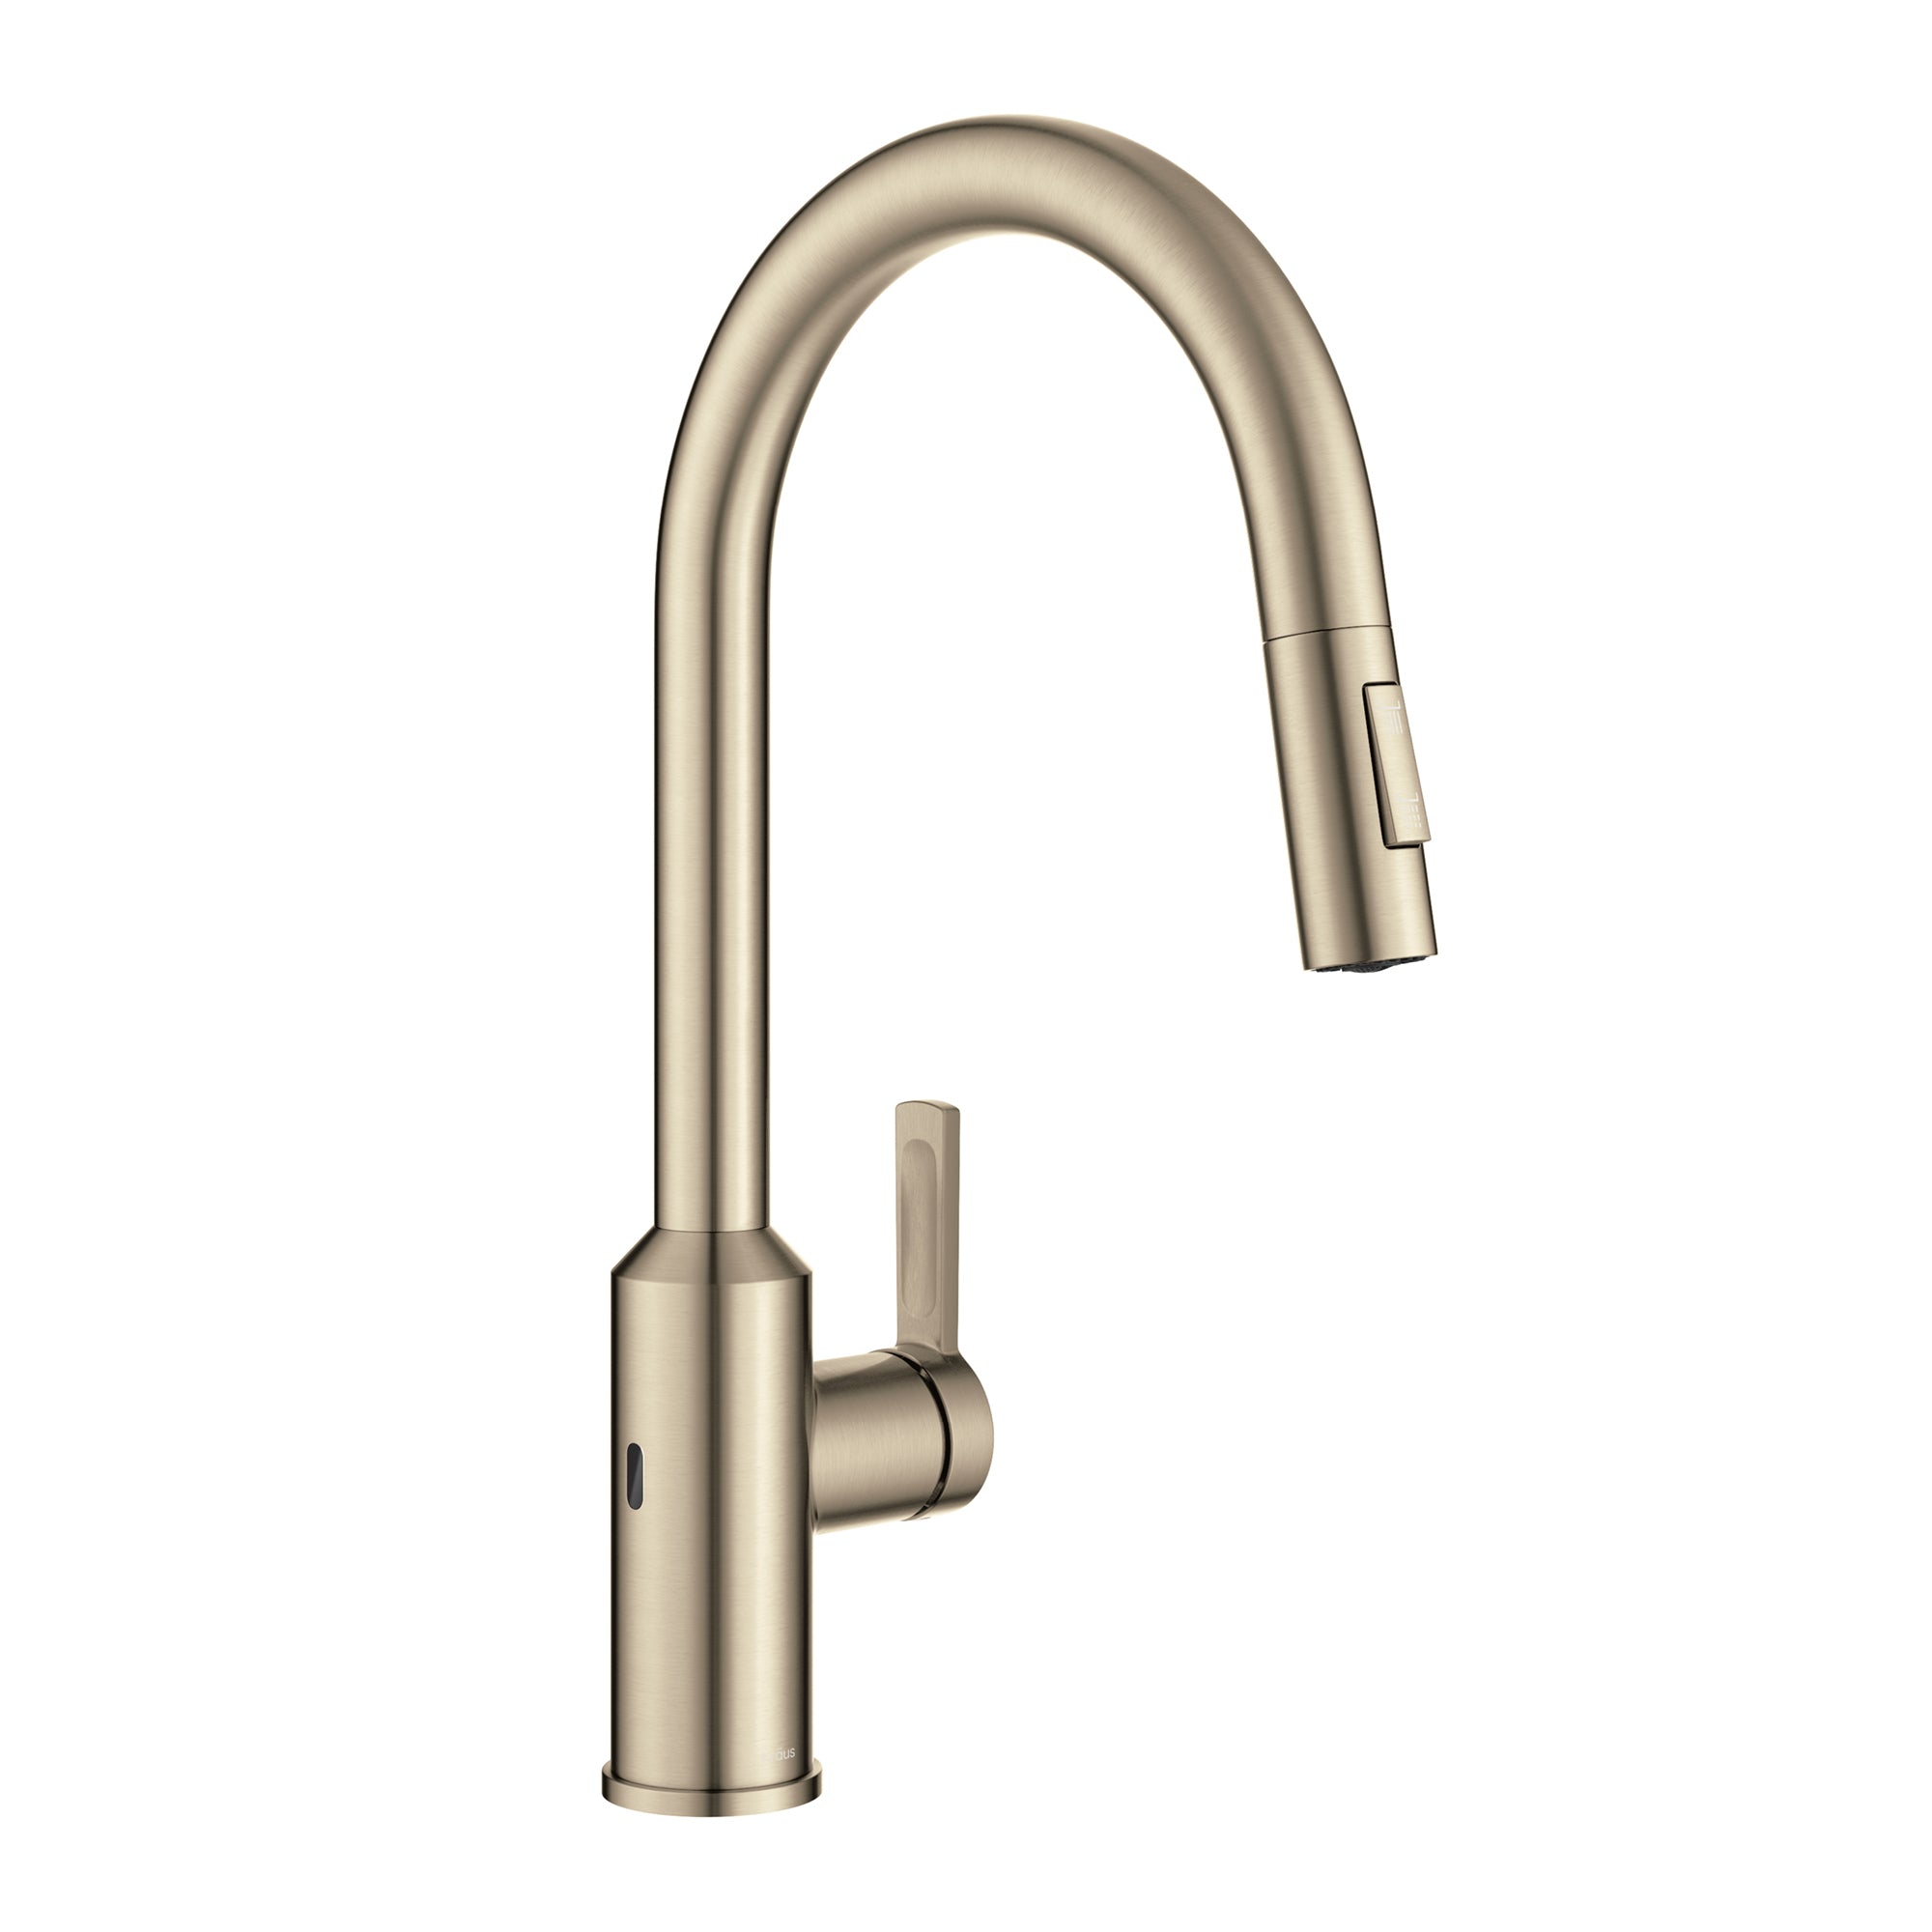 KRAUS Oletto Touchless Pull-Down Kitchen Faucet in Spot-Free Antique Champagne Bronze